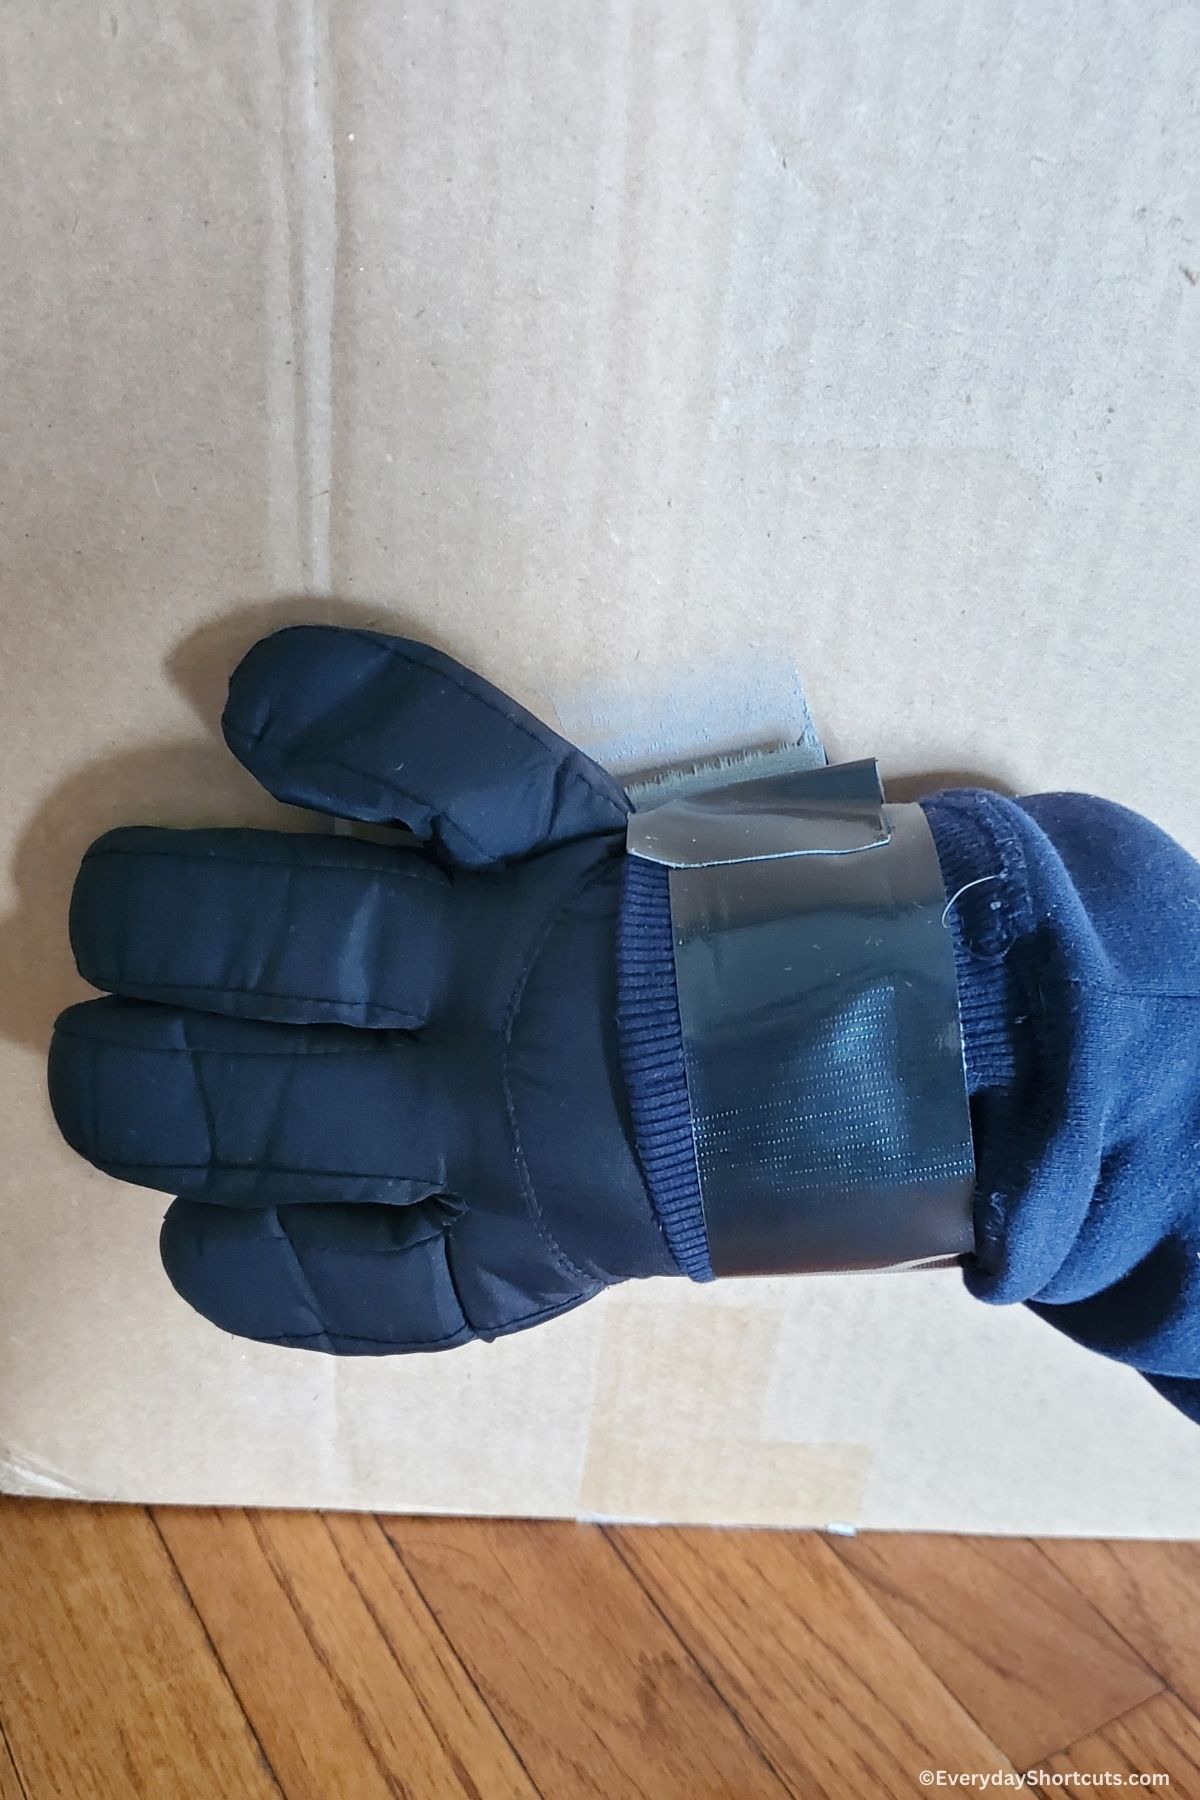 duct taped gloves to box